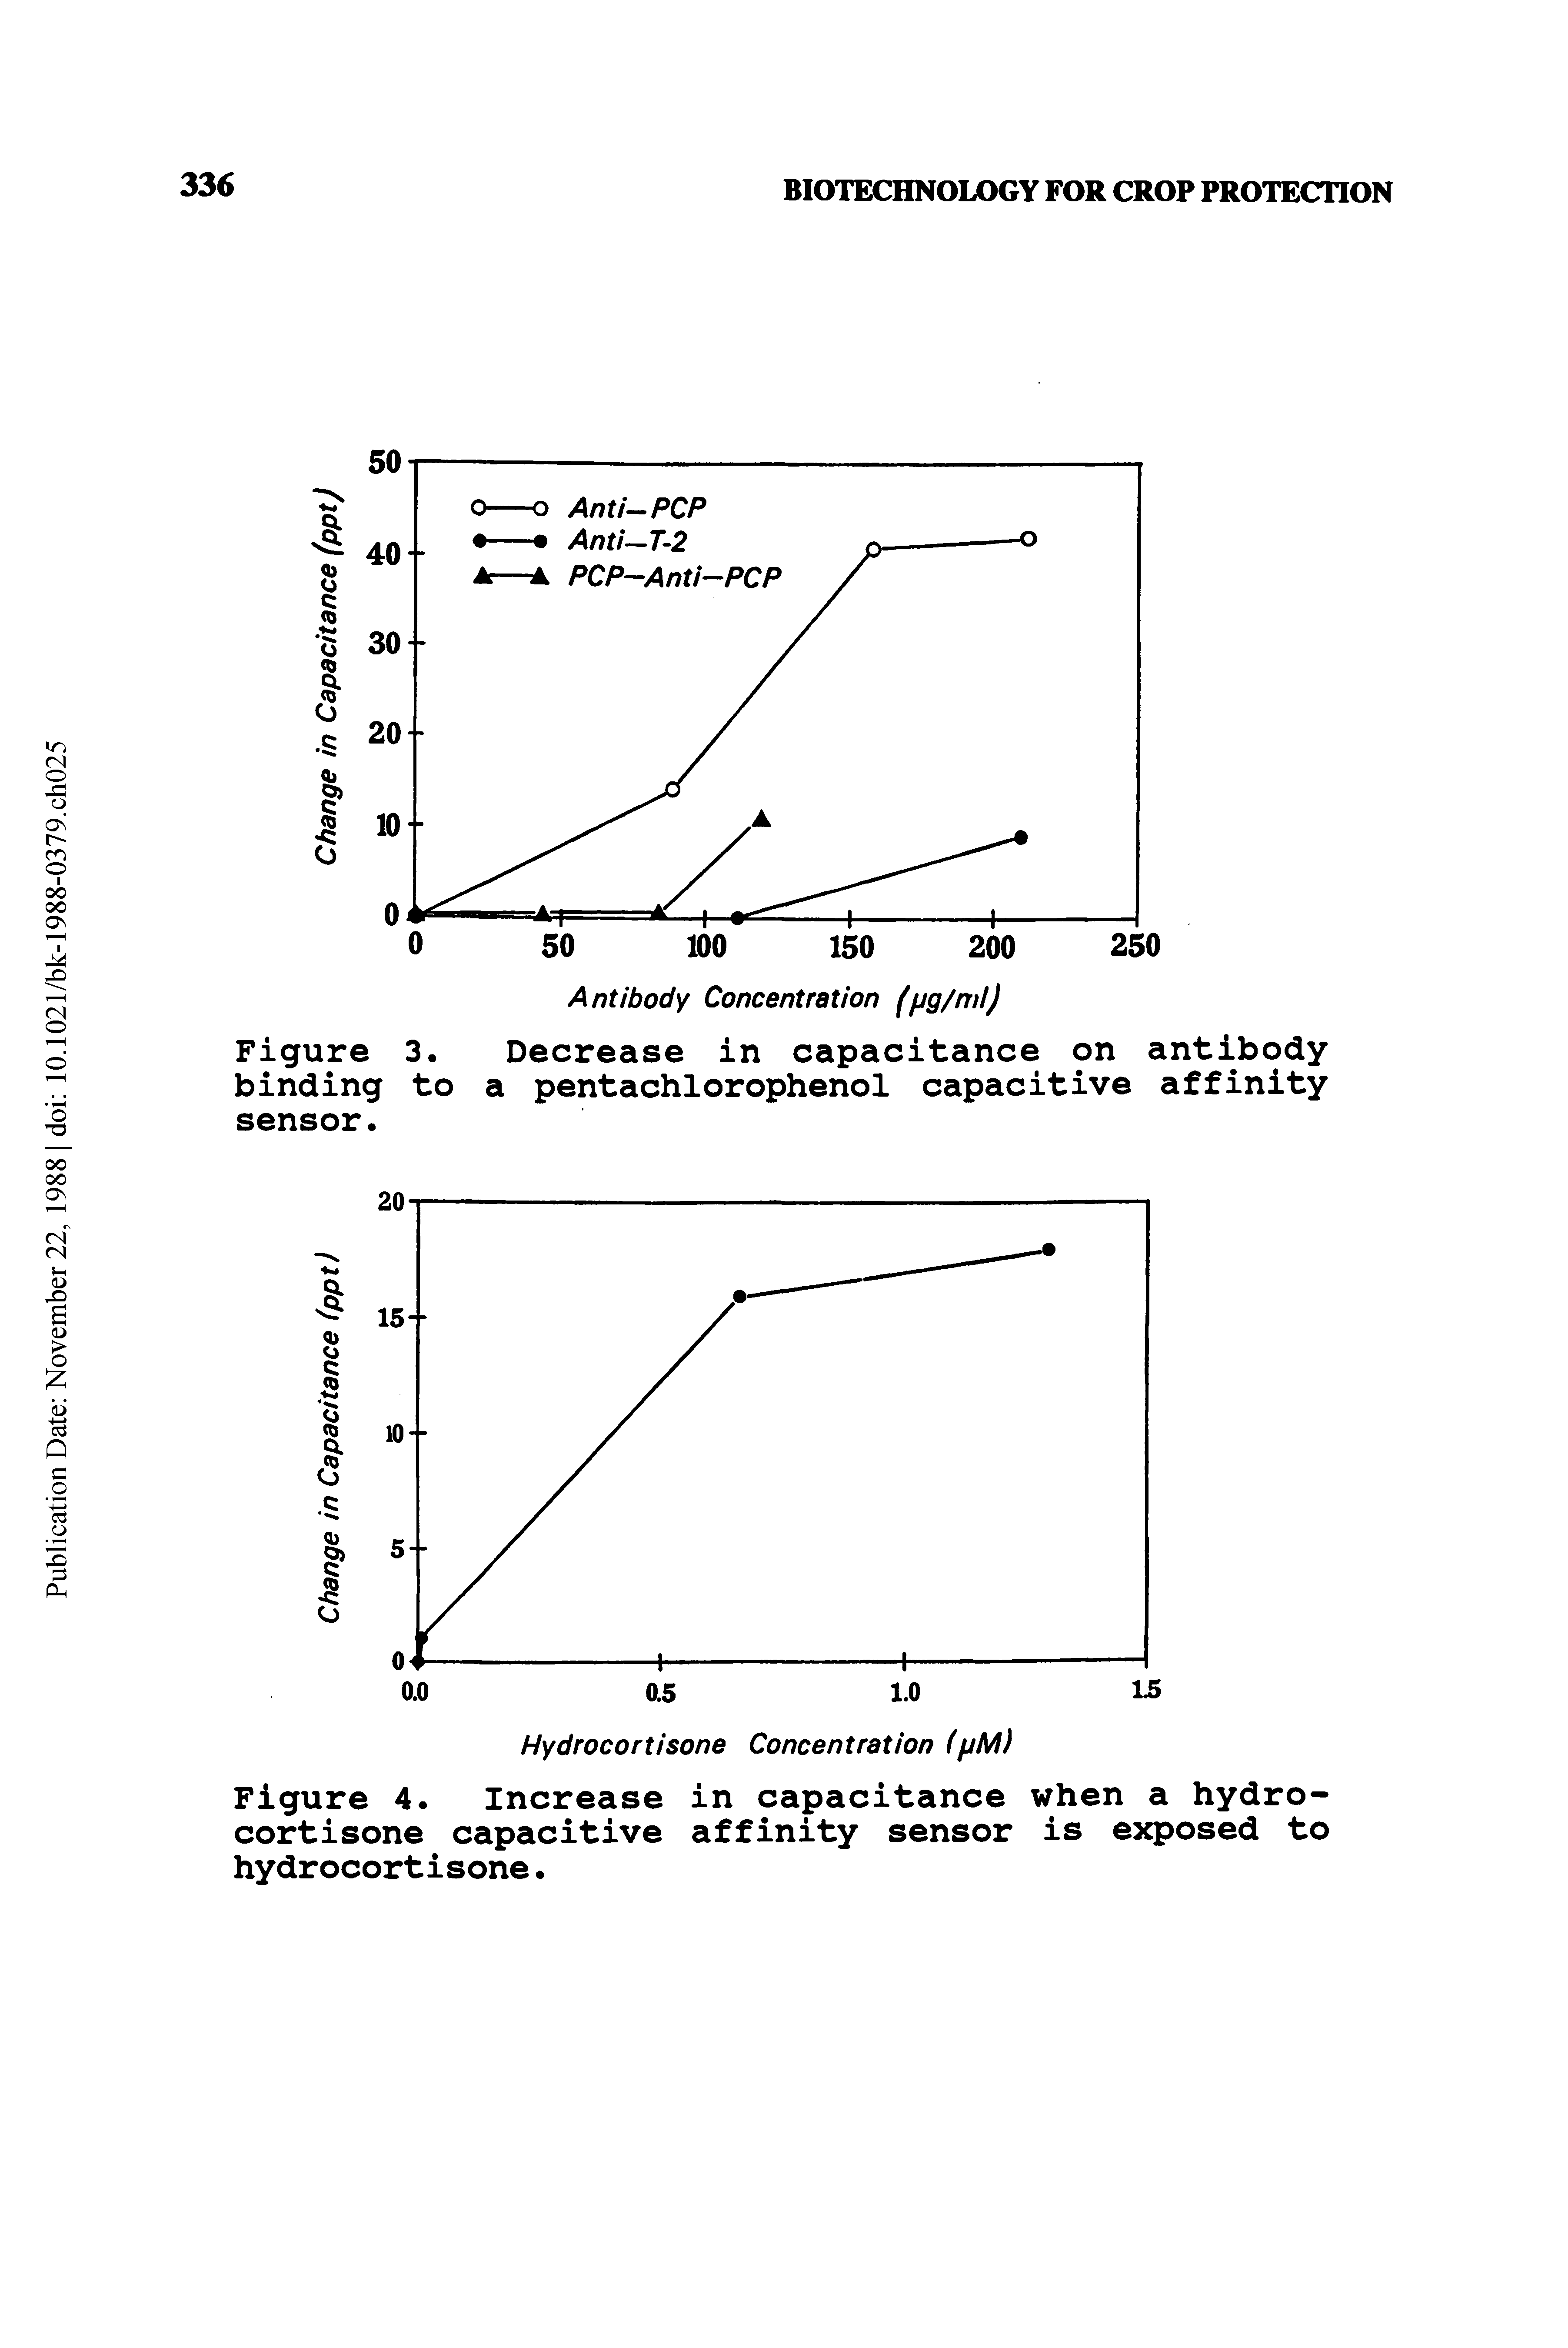 Figure 4. Increase in capacitance when a hydrocortisone capacitive affinity sensor is exposed to hydrocortisone.